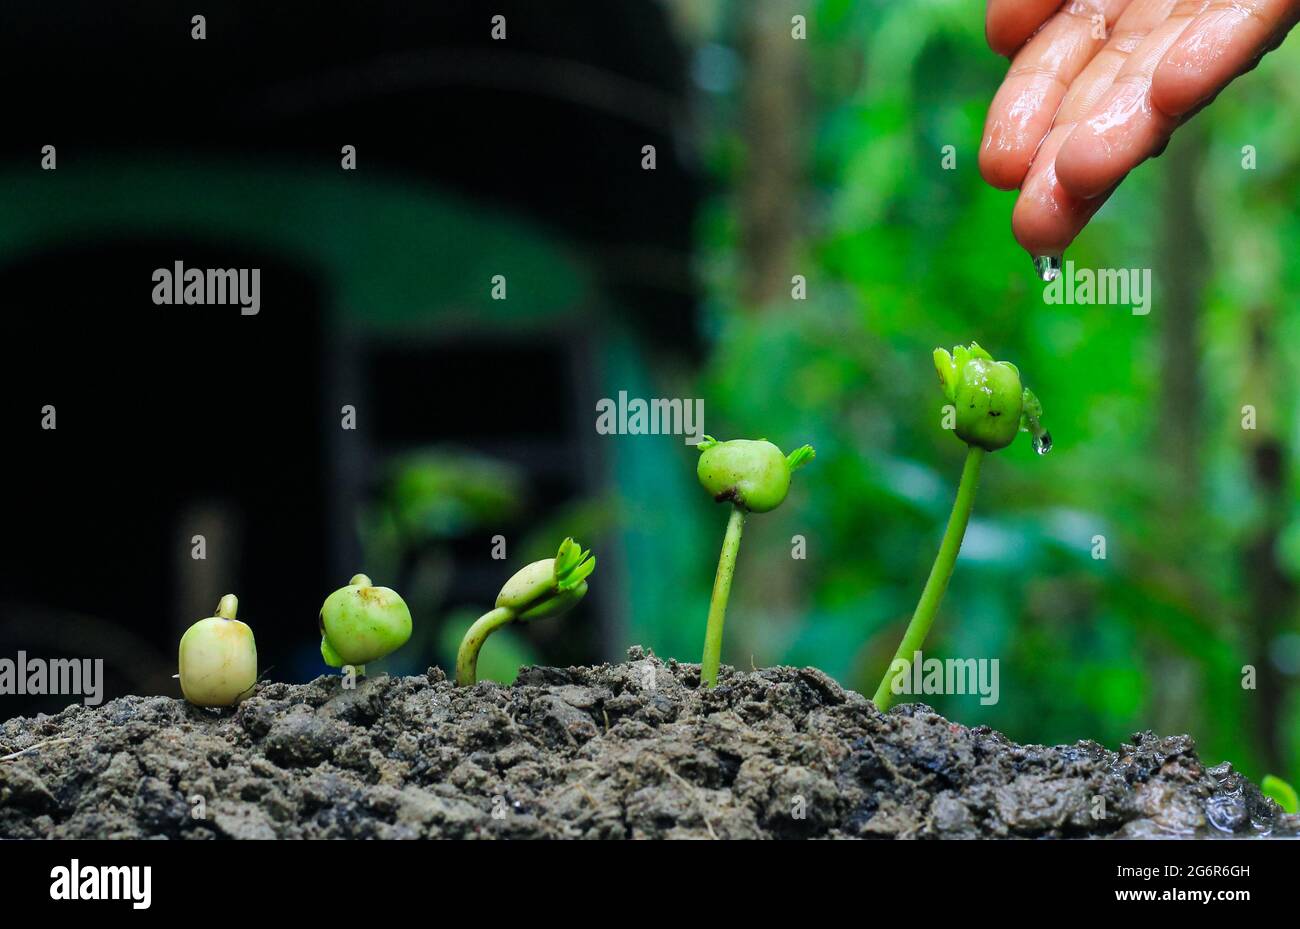 Growing plants. Plant seedling. Hand nurturing and watering young baby plants growing in germination sequence on fertile soil. savings concept. Stock Photo